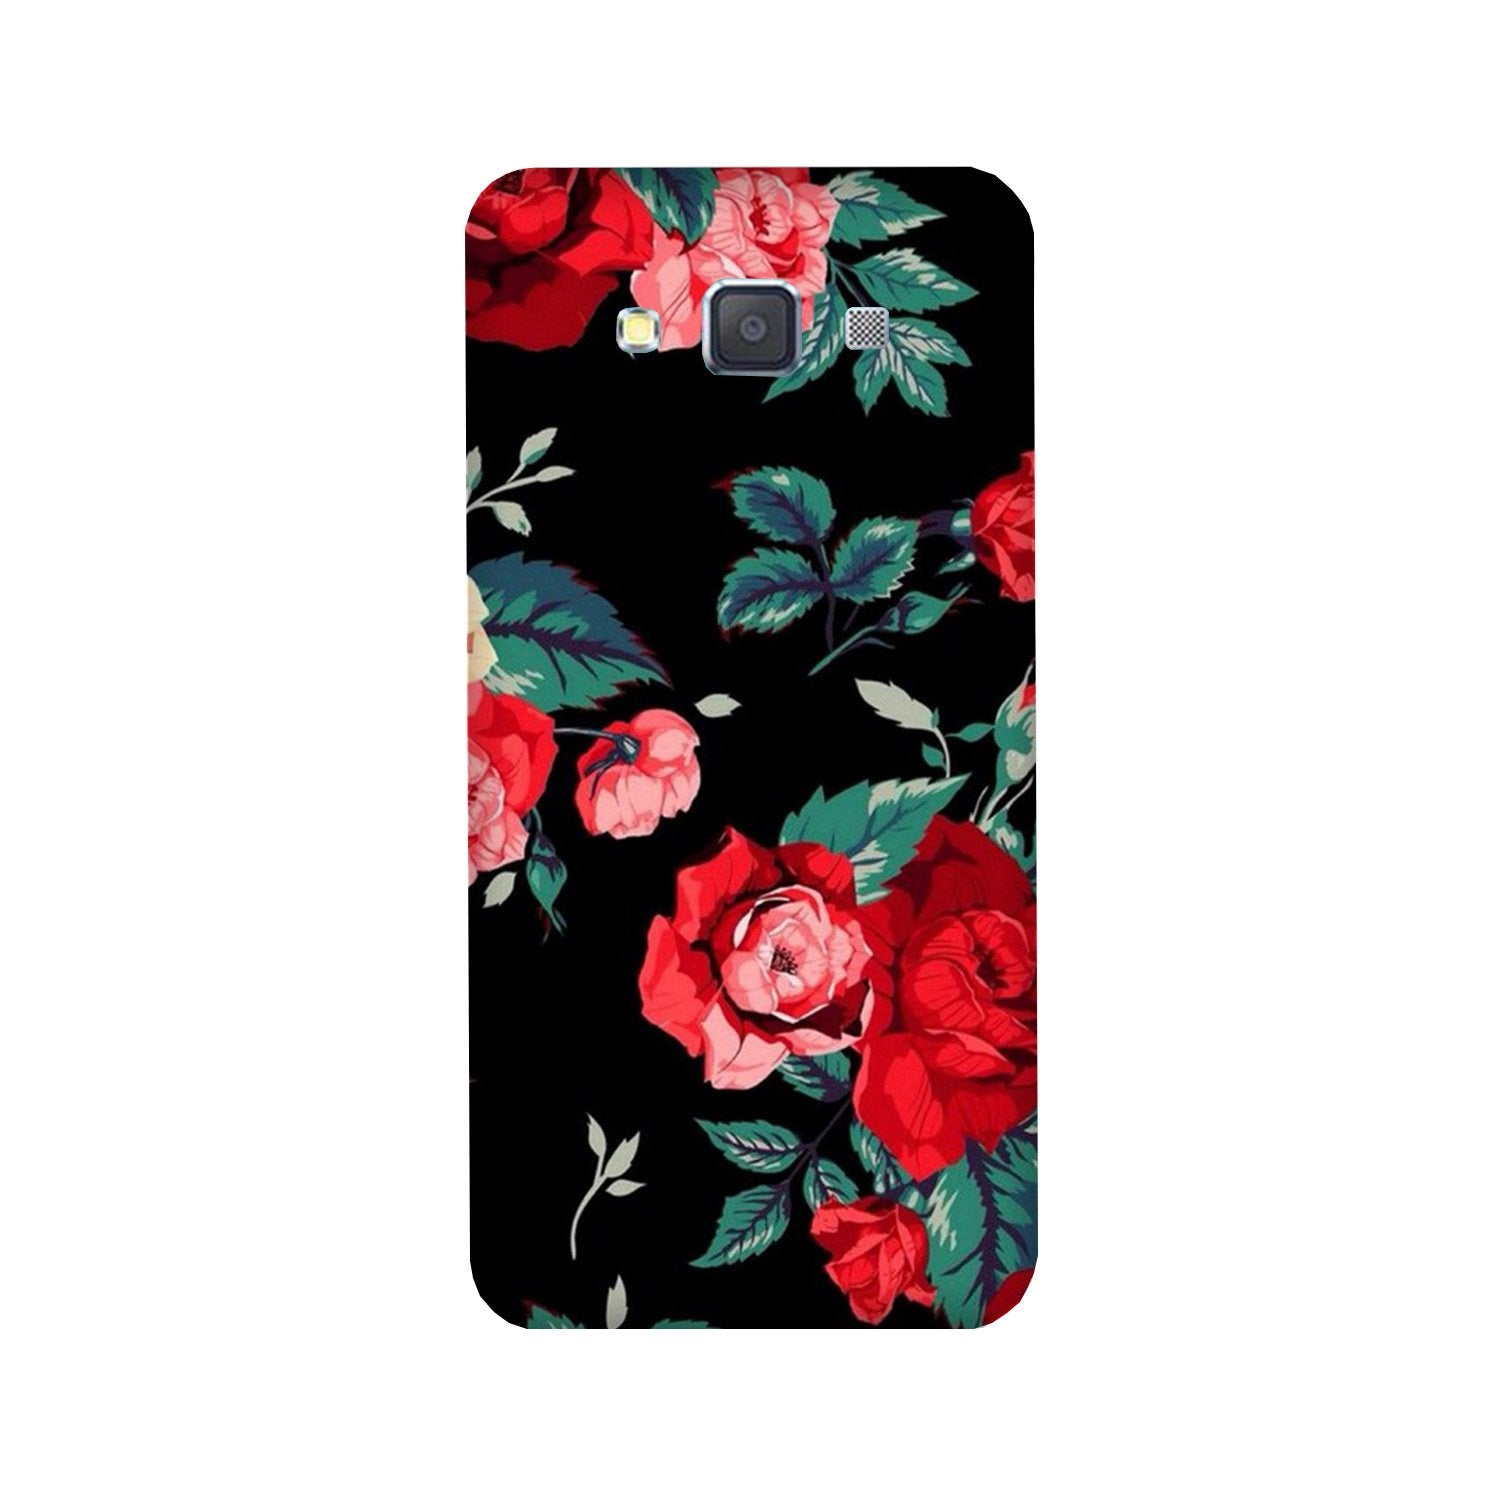 Red Rose2 Case for Galaxy ON7/ON7 Pro